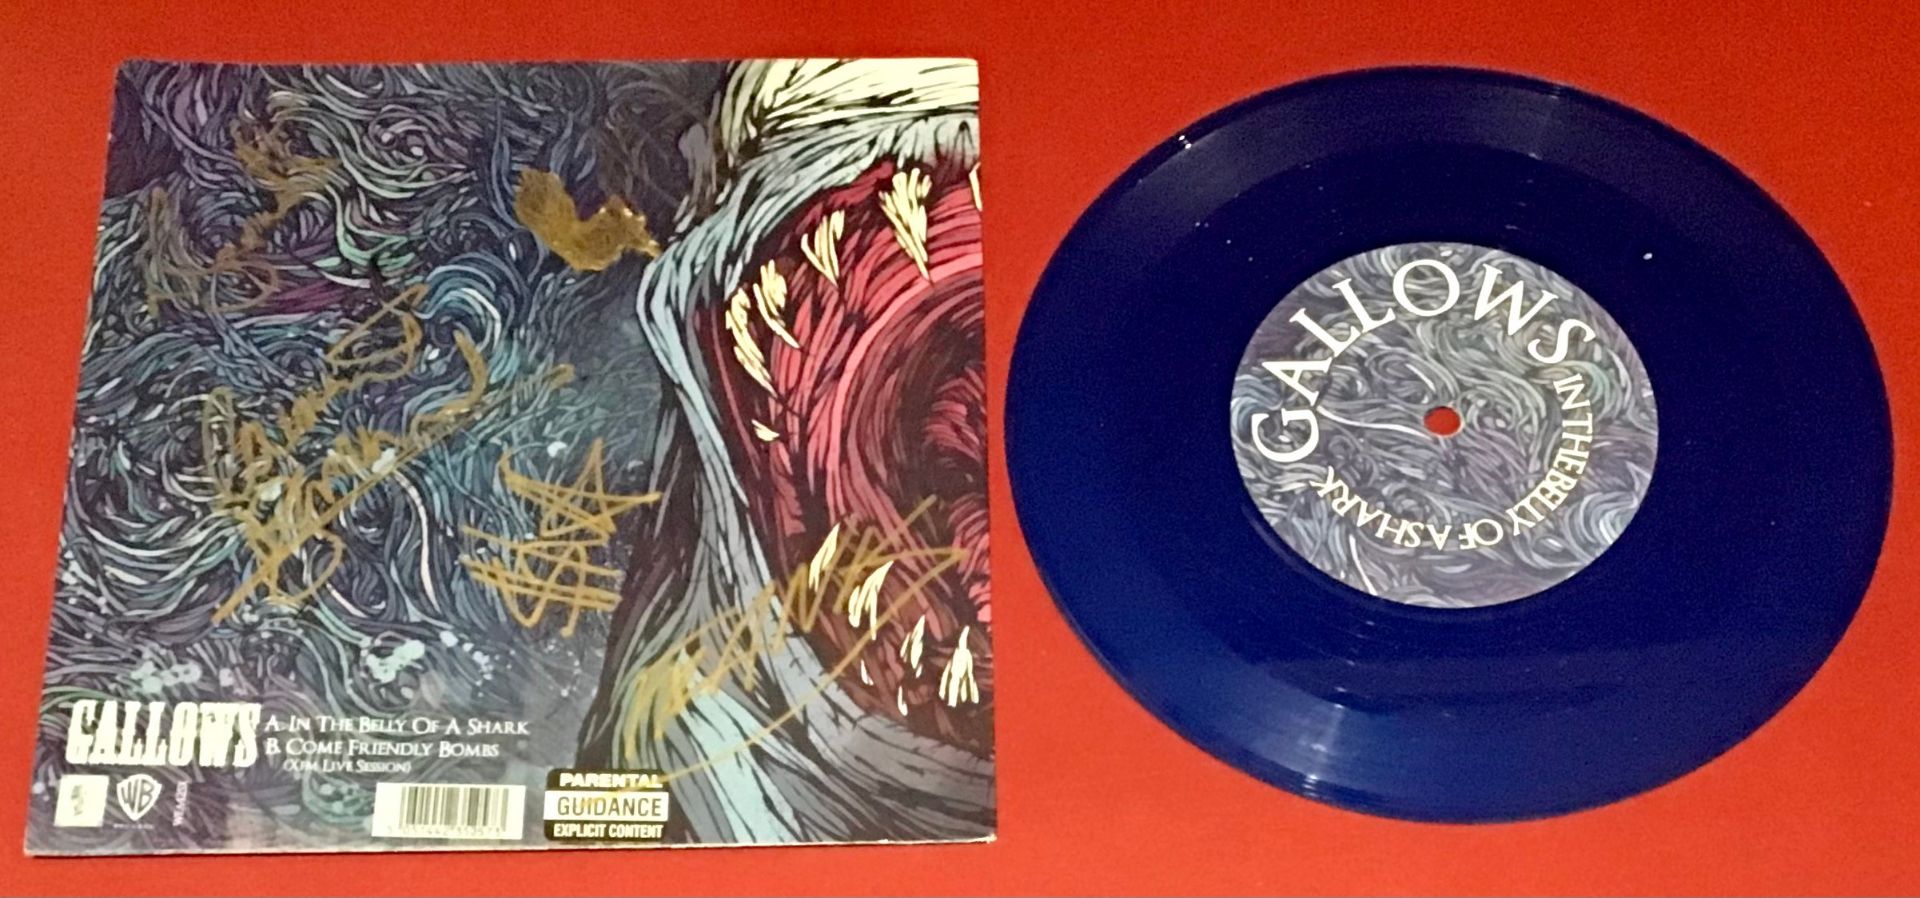 GALLOWS SIGNED 7” VINYL SINGLE. This is a blue vinyl of the song - In The Belly Of A Shark - signed - Image 2 of 2